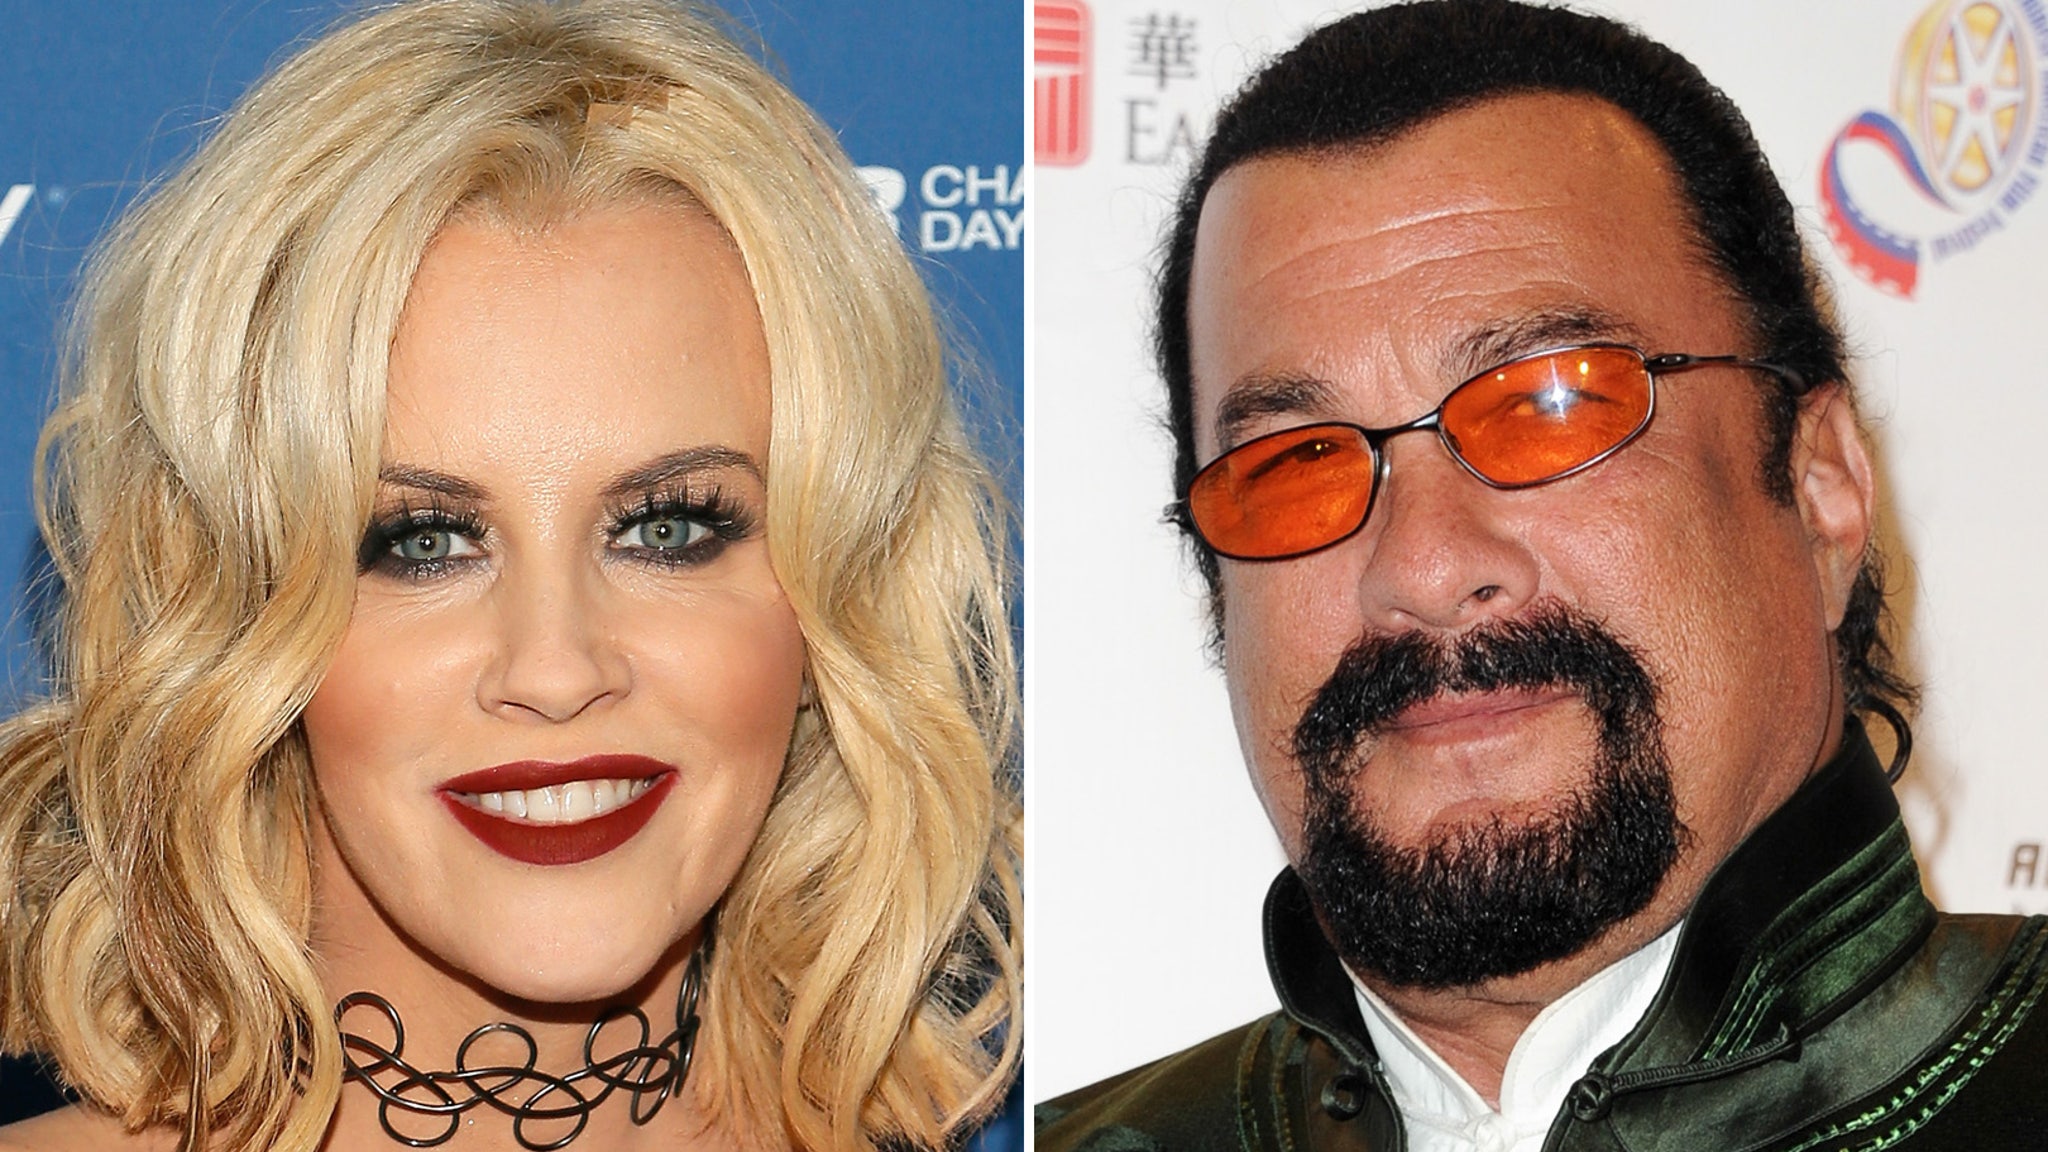 Jenny Mccarthy Describes Alleged Steven Seagal Casting Couch Story It Just So Grossed Me Out 